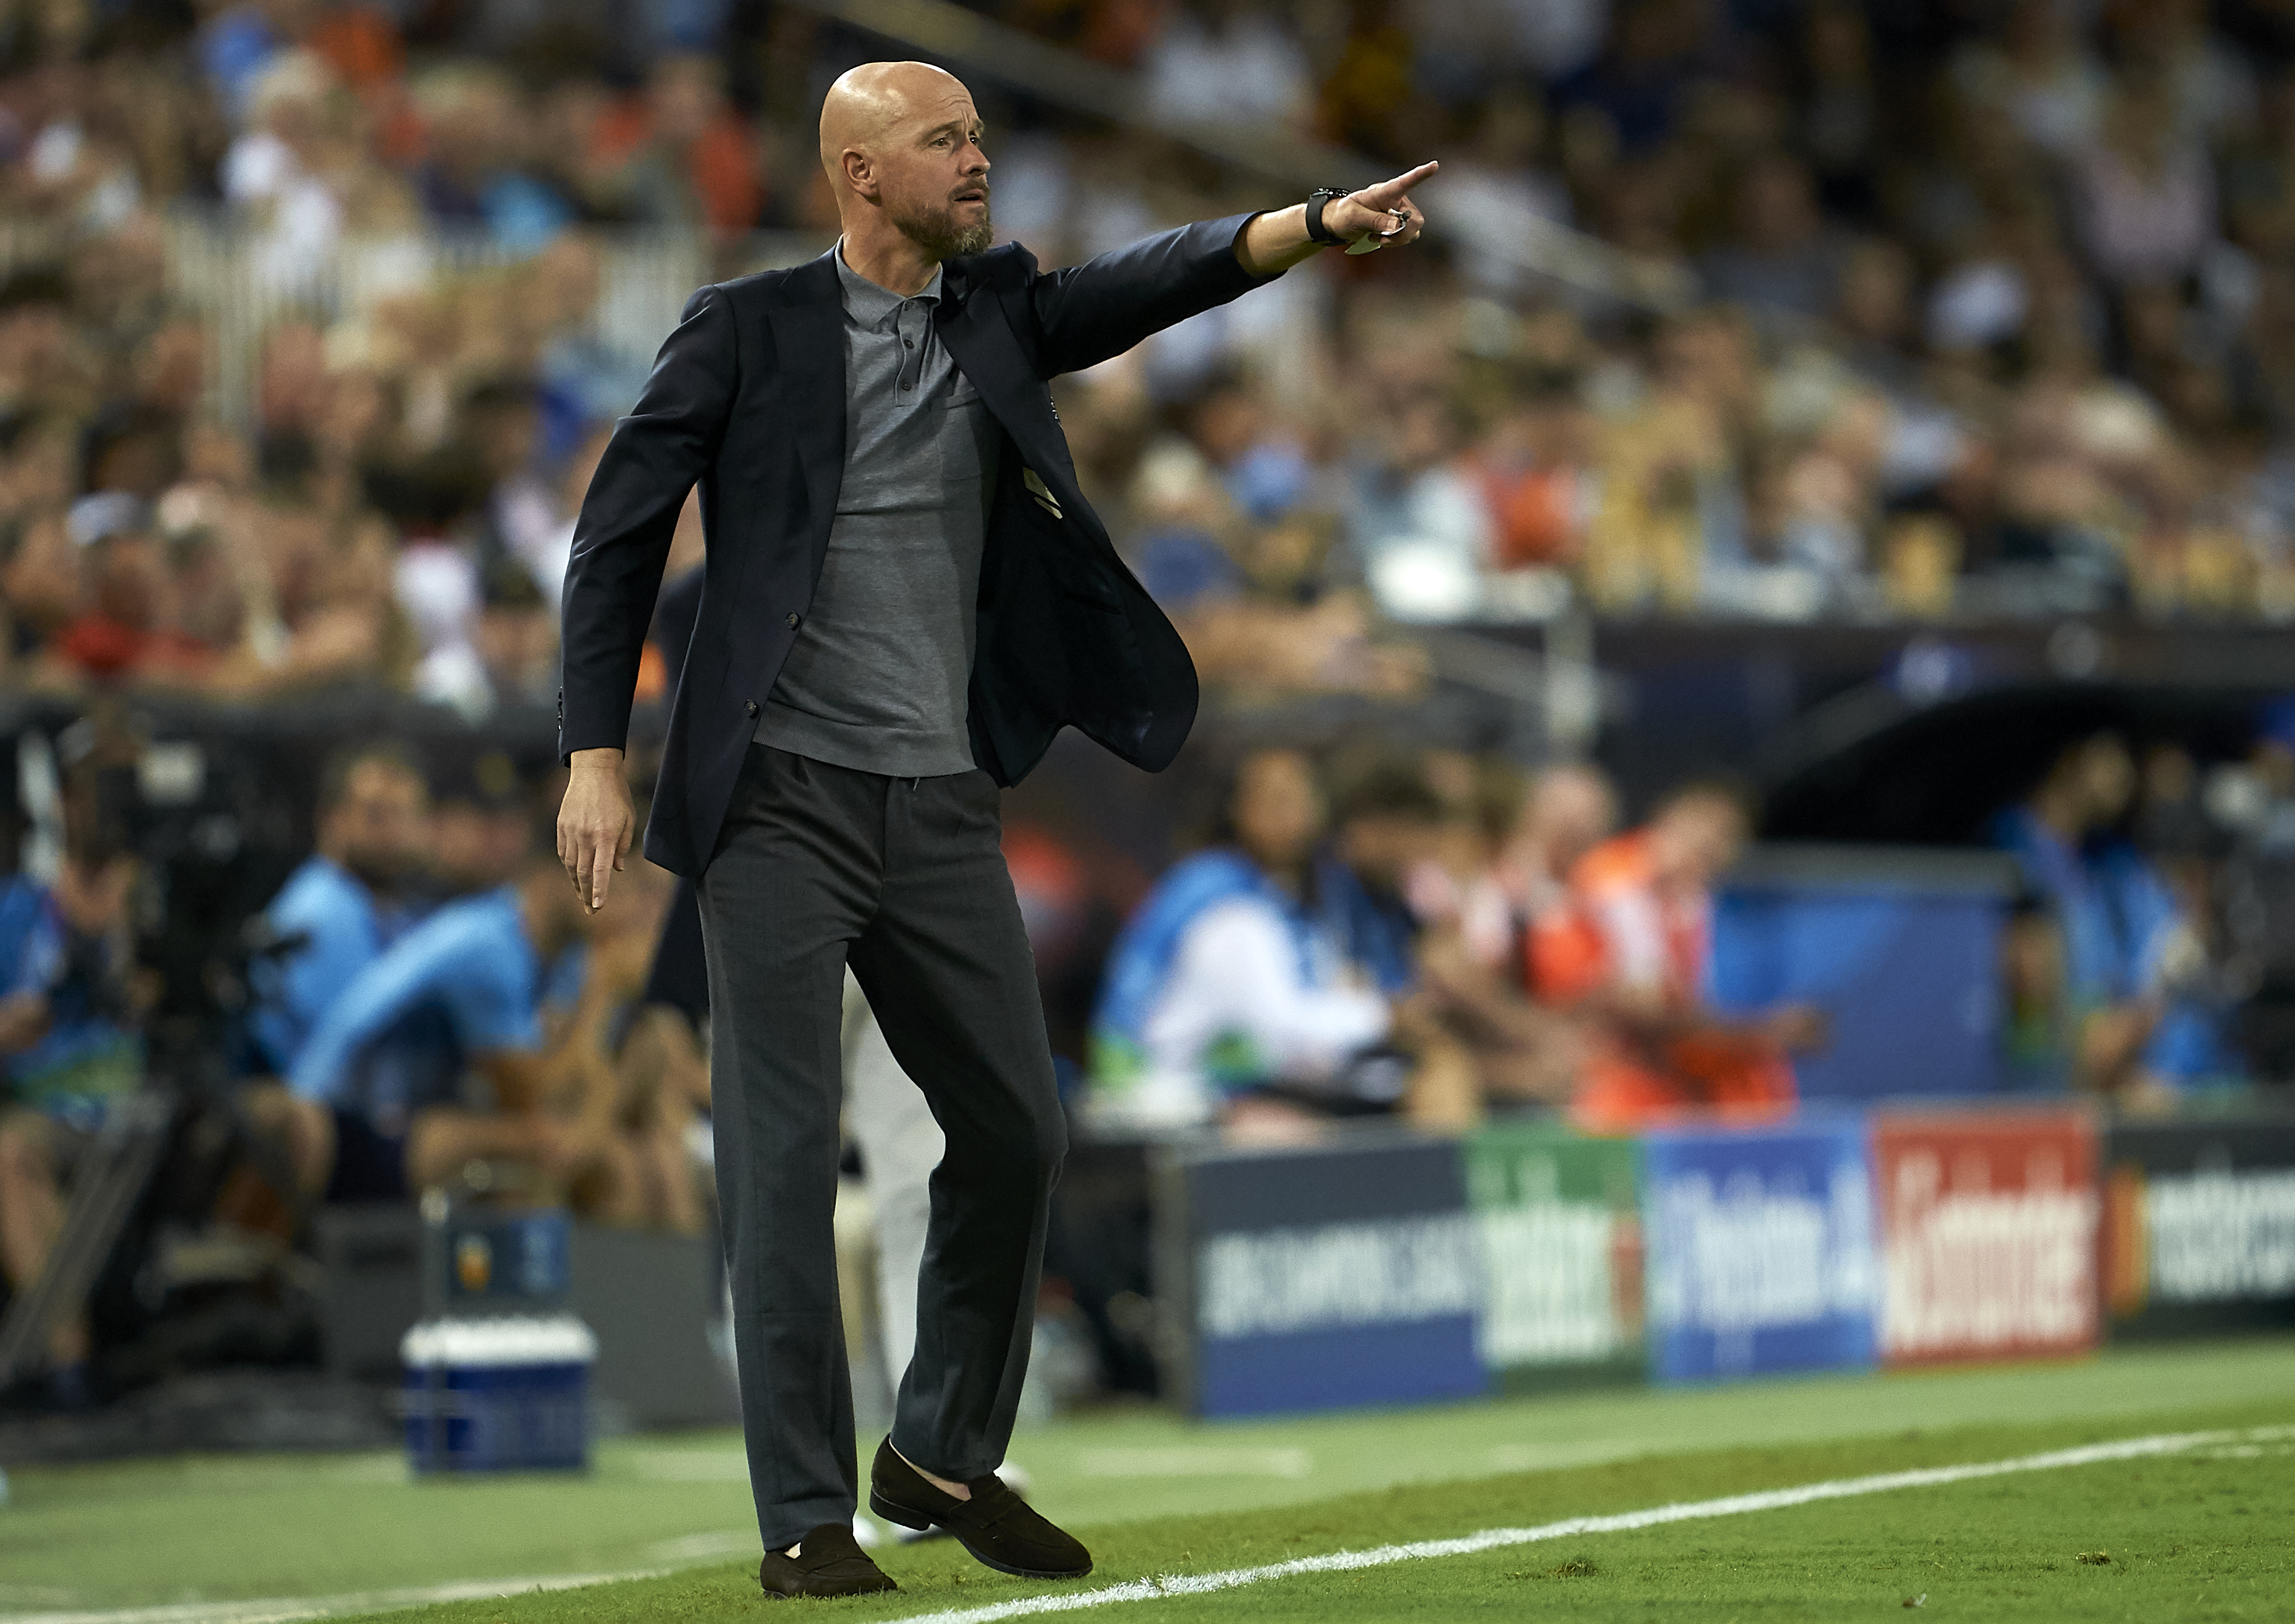 Manchester United boss Ten Hag can take more than one lesson from his Anfield humbling.